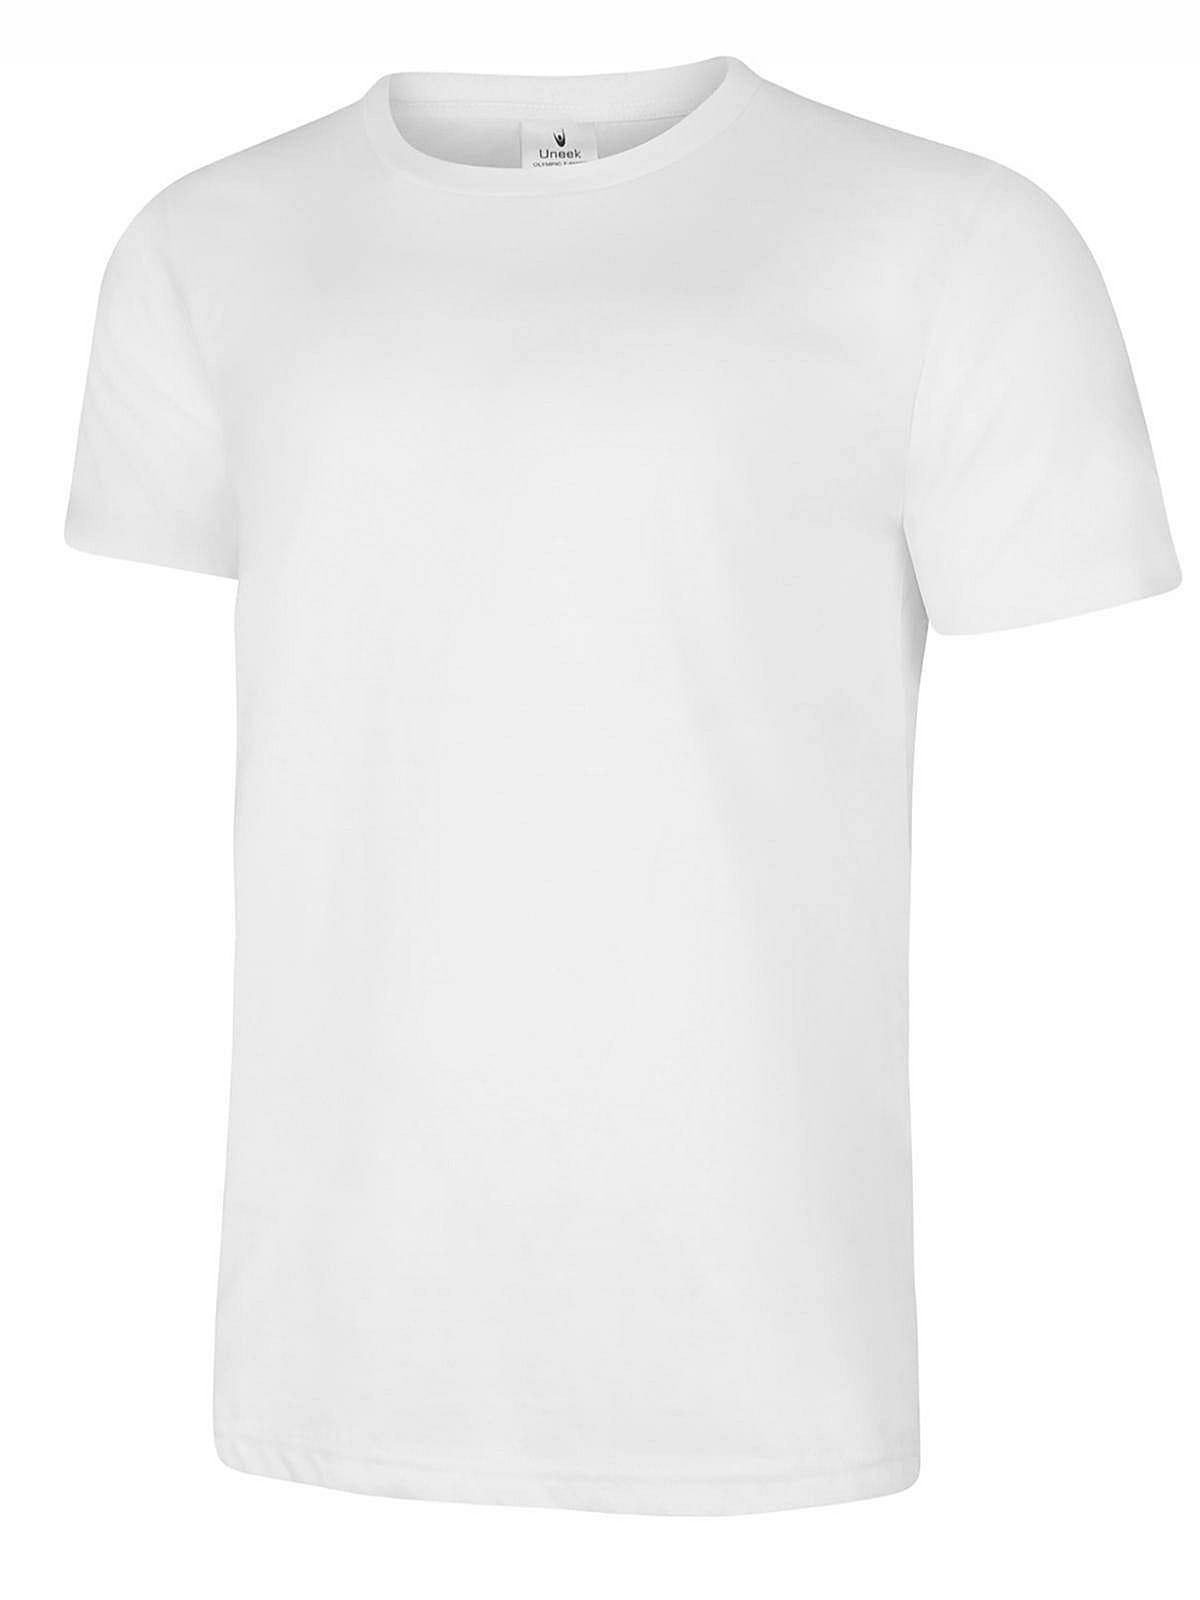 Uneek 150GSM Olympic T-Shirt in White (Product Code: UC320)